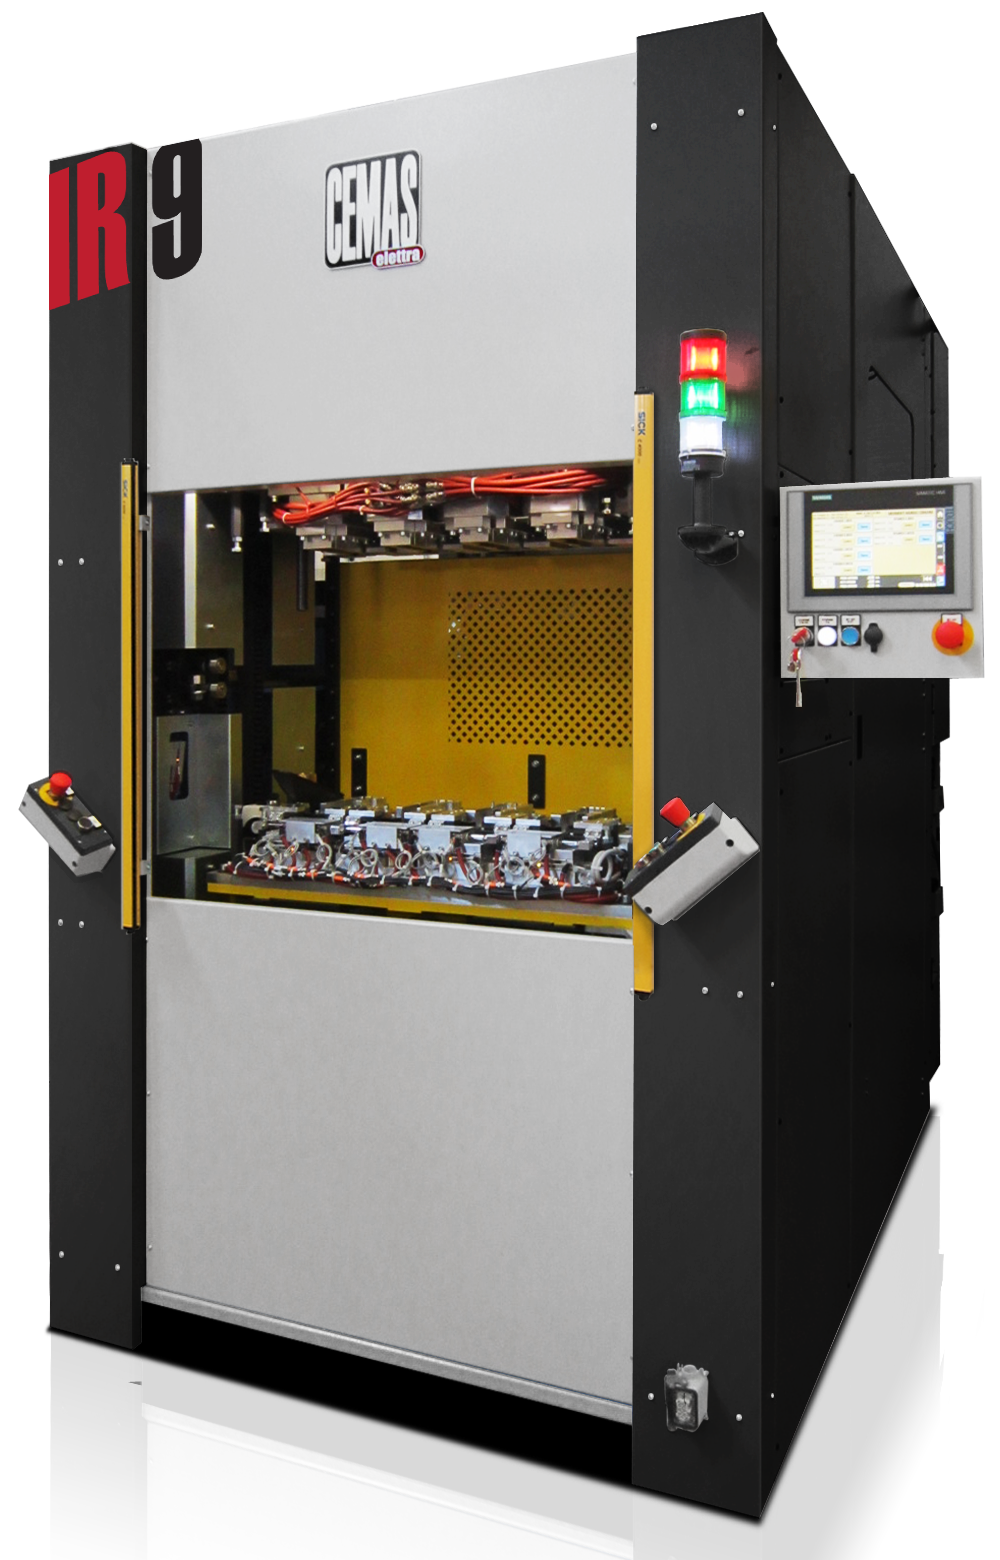 UK Suppliers of High Performance Hotplate Welding Machines